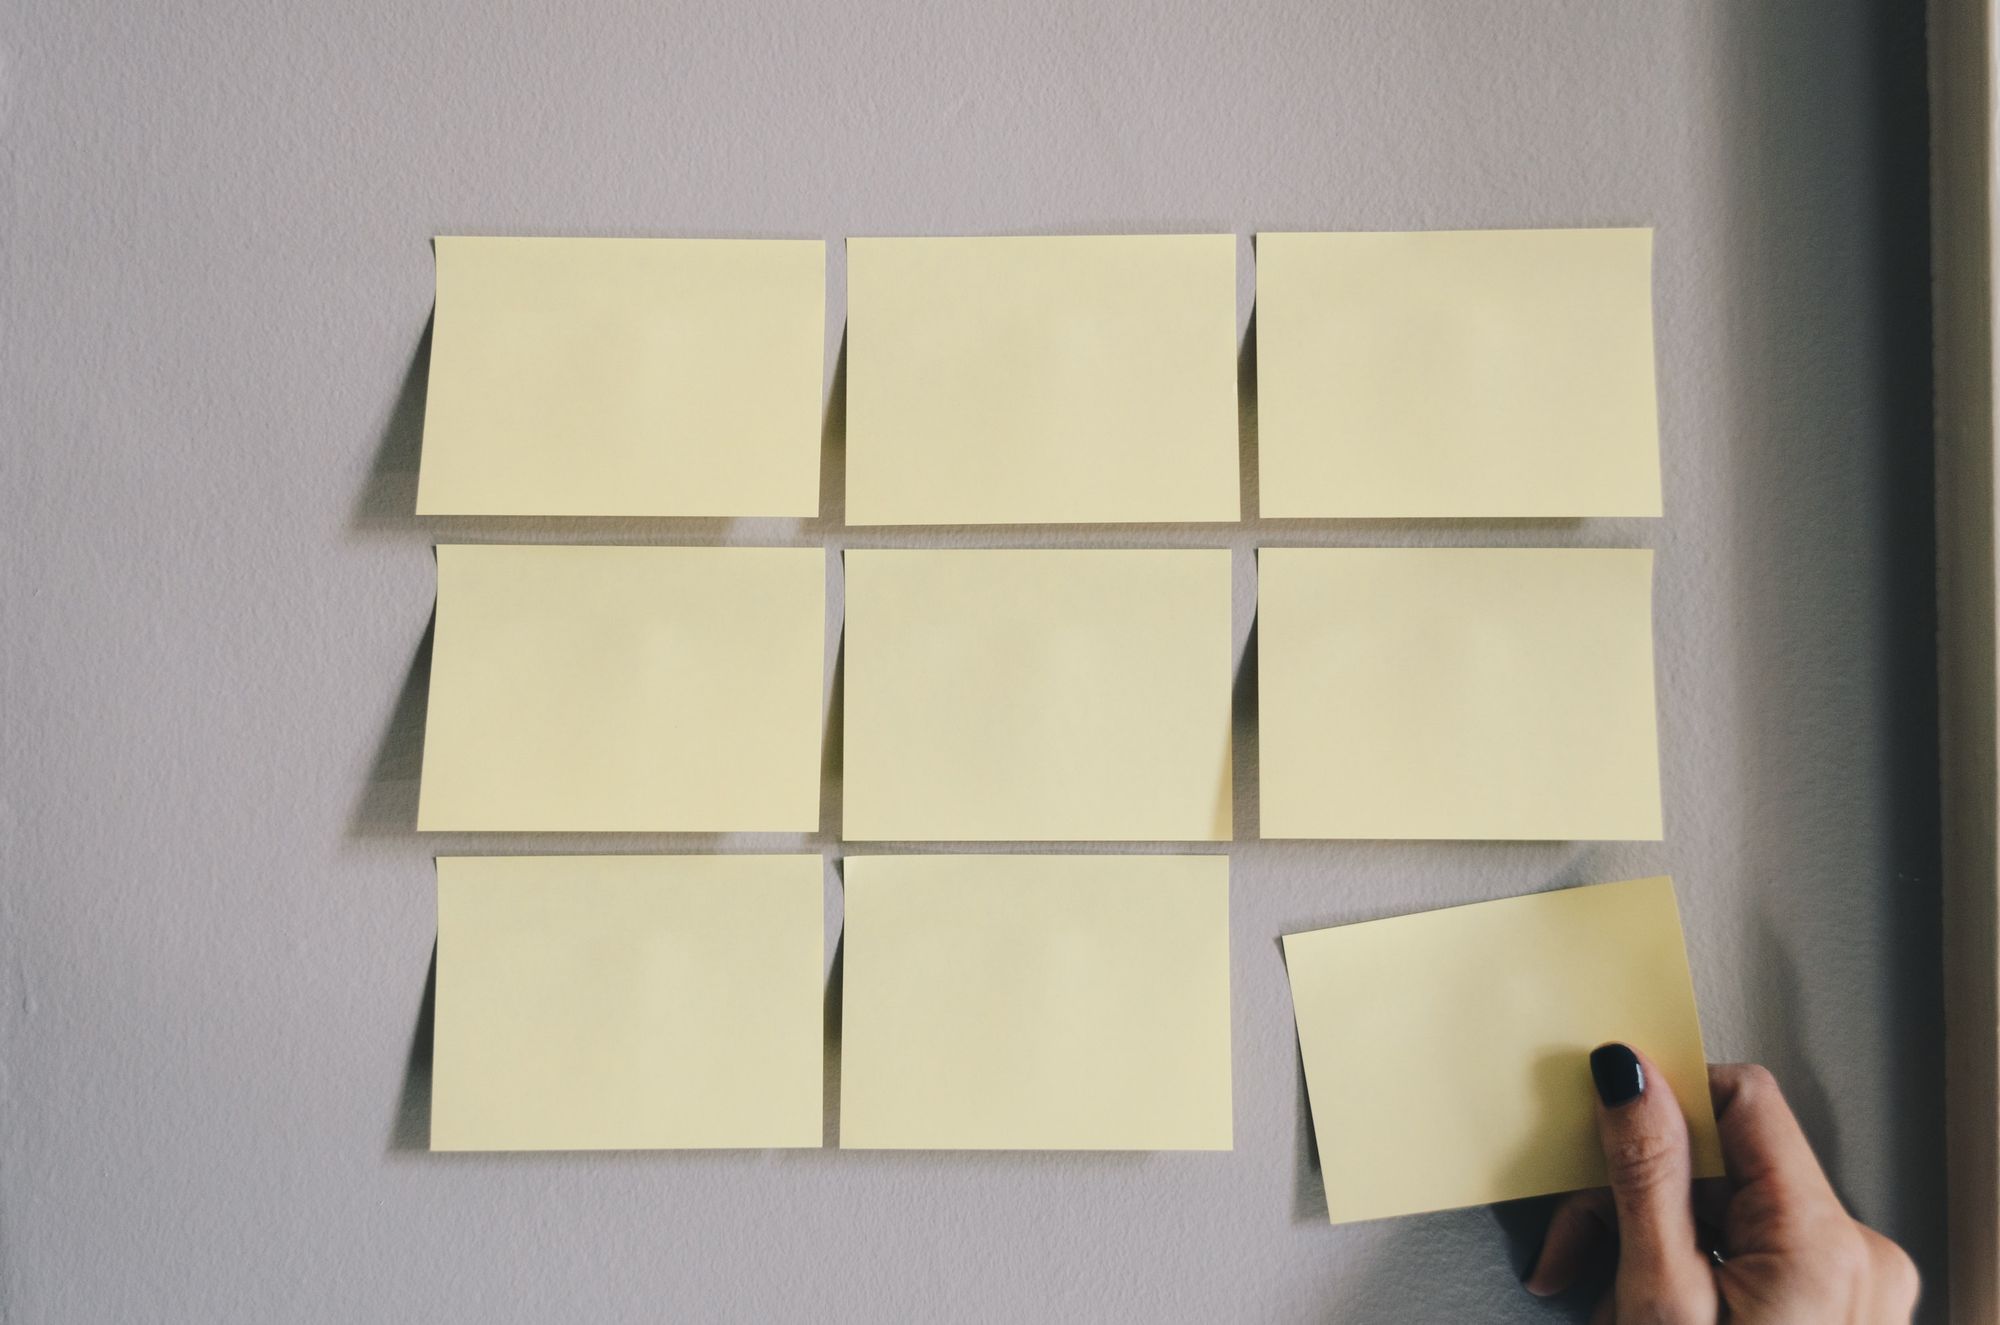 Nine empty sticky notes stuck to the wall.